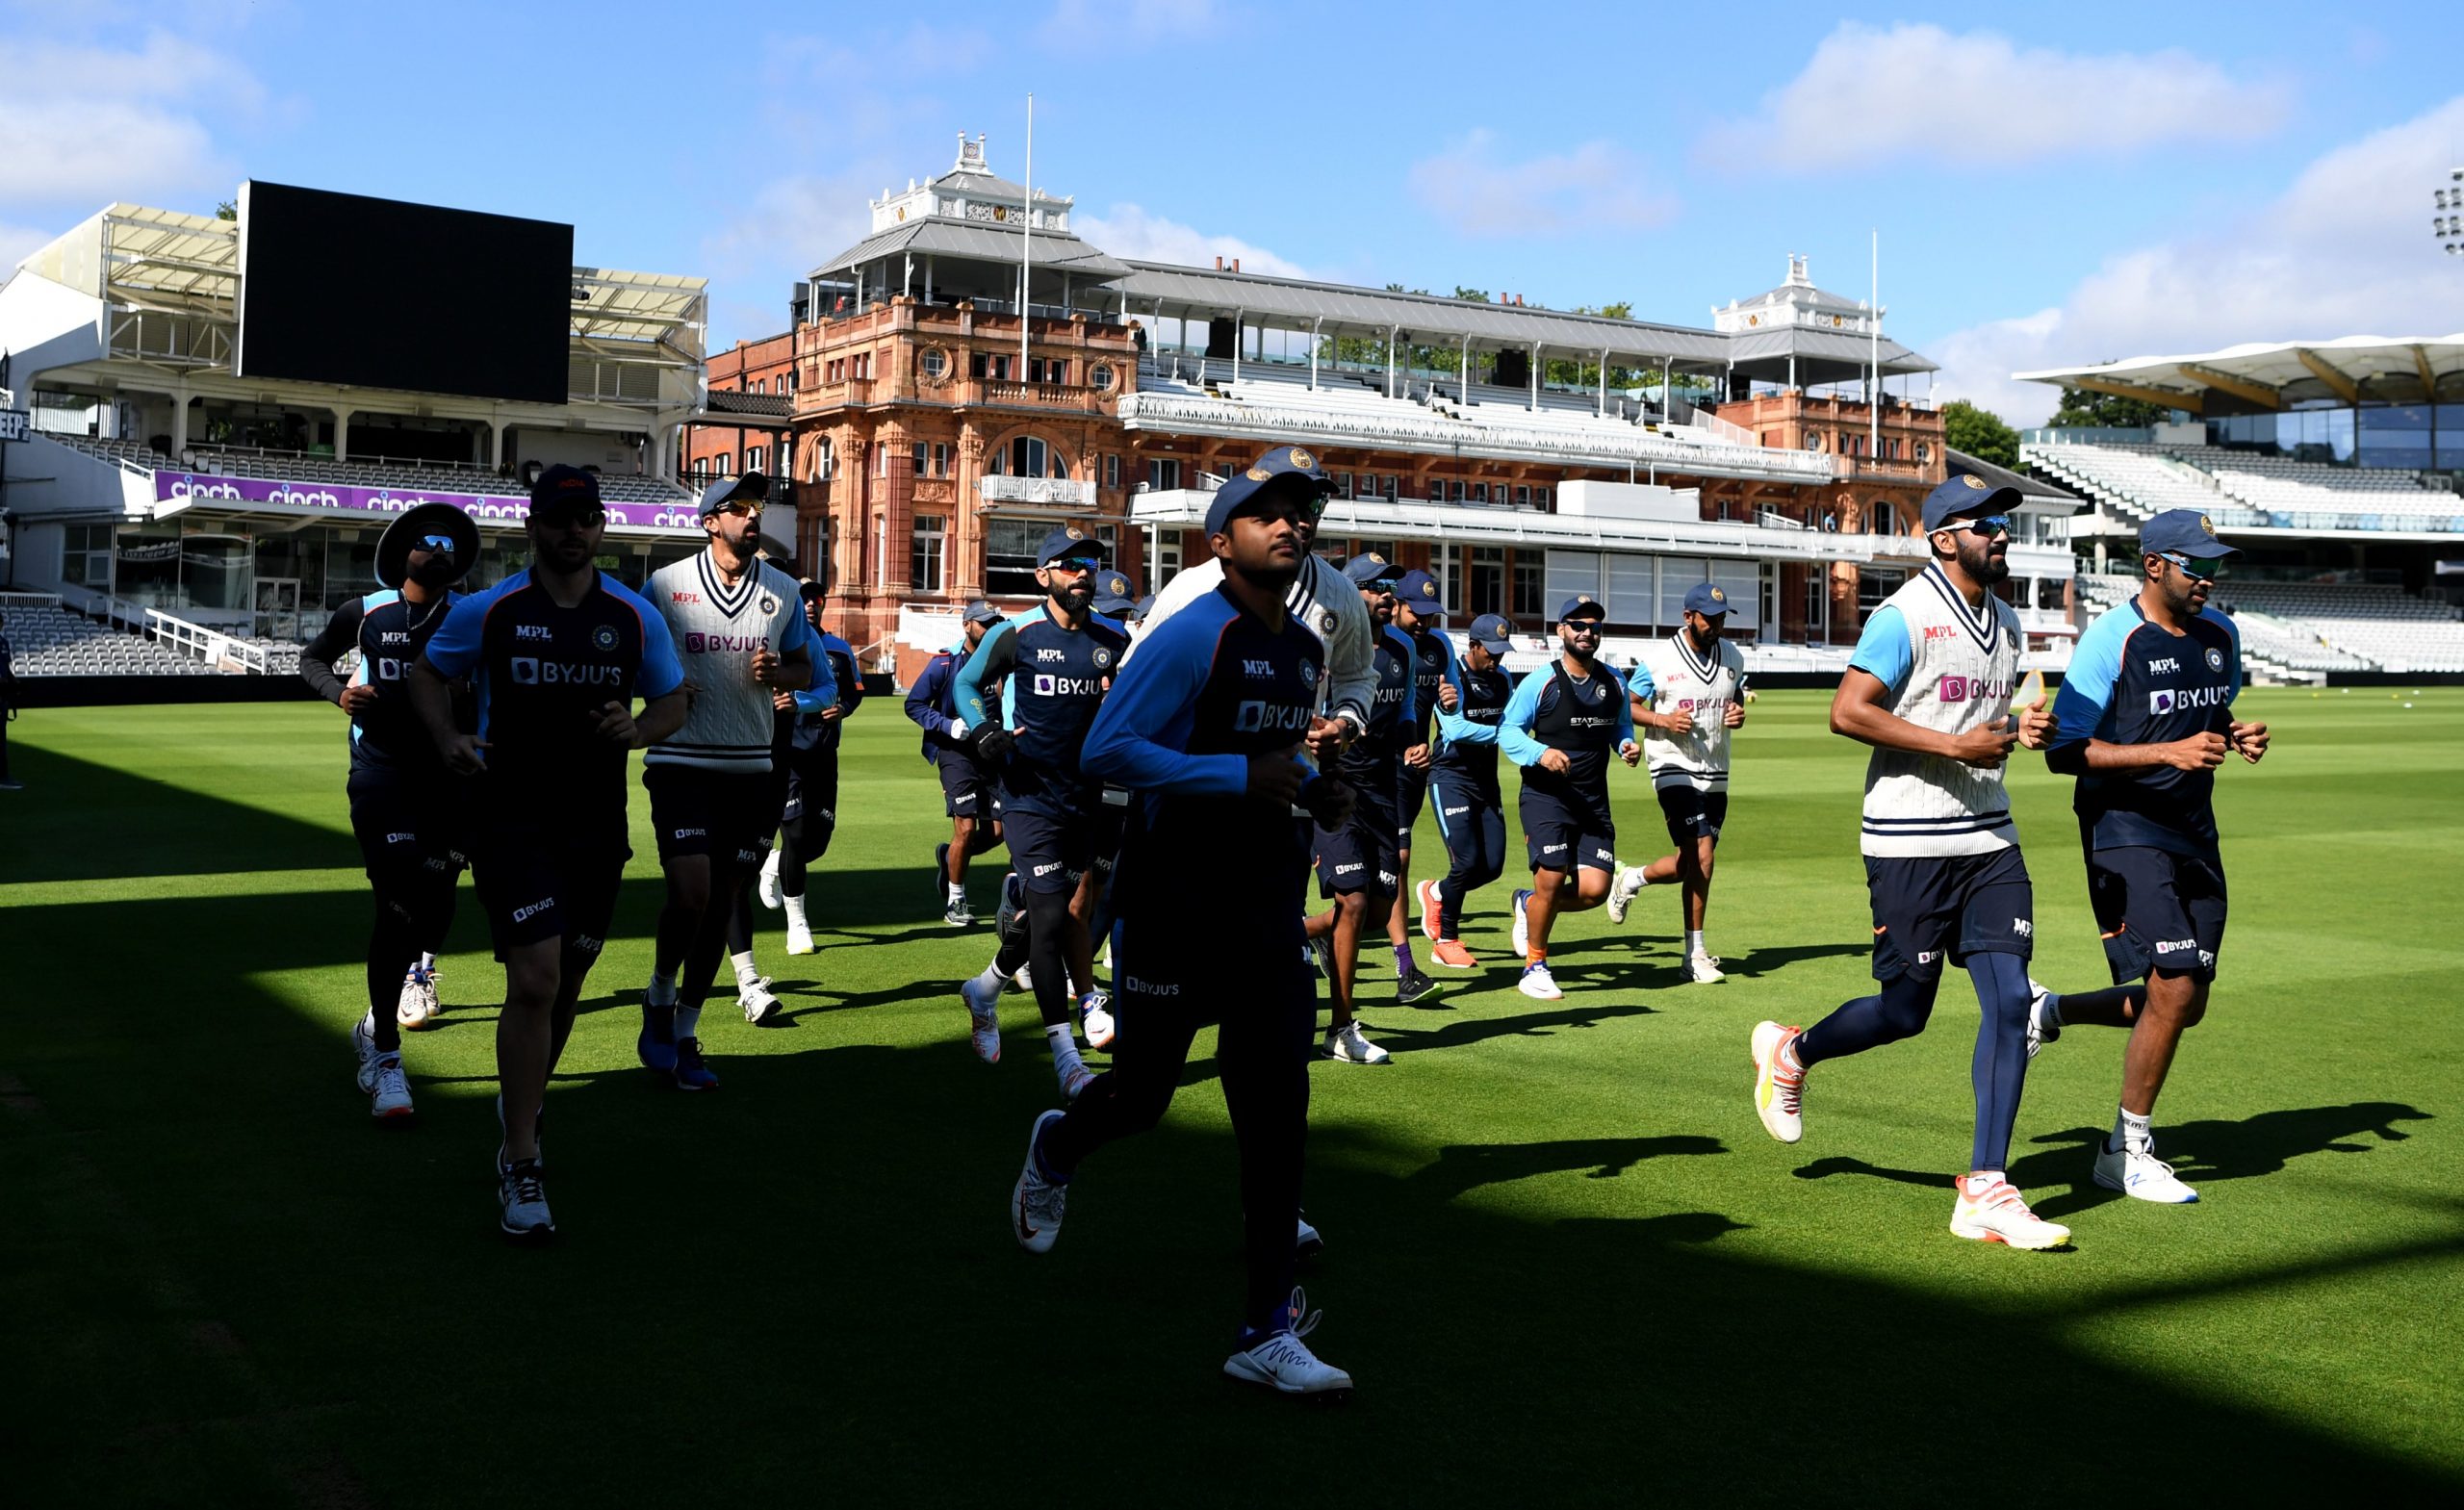 ENG vs IND 2021 Watch: Team India’s Final Preparations Ahead Of Headingley Test